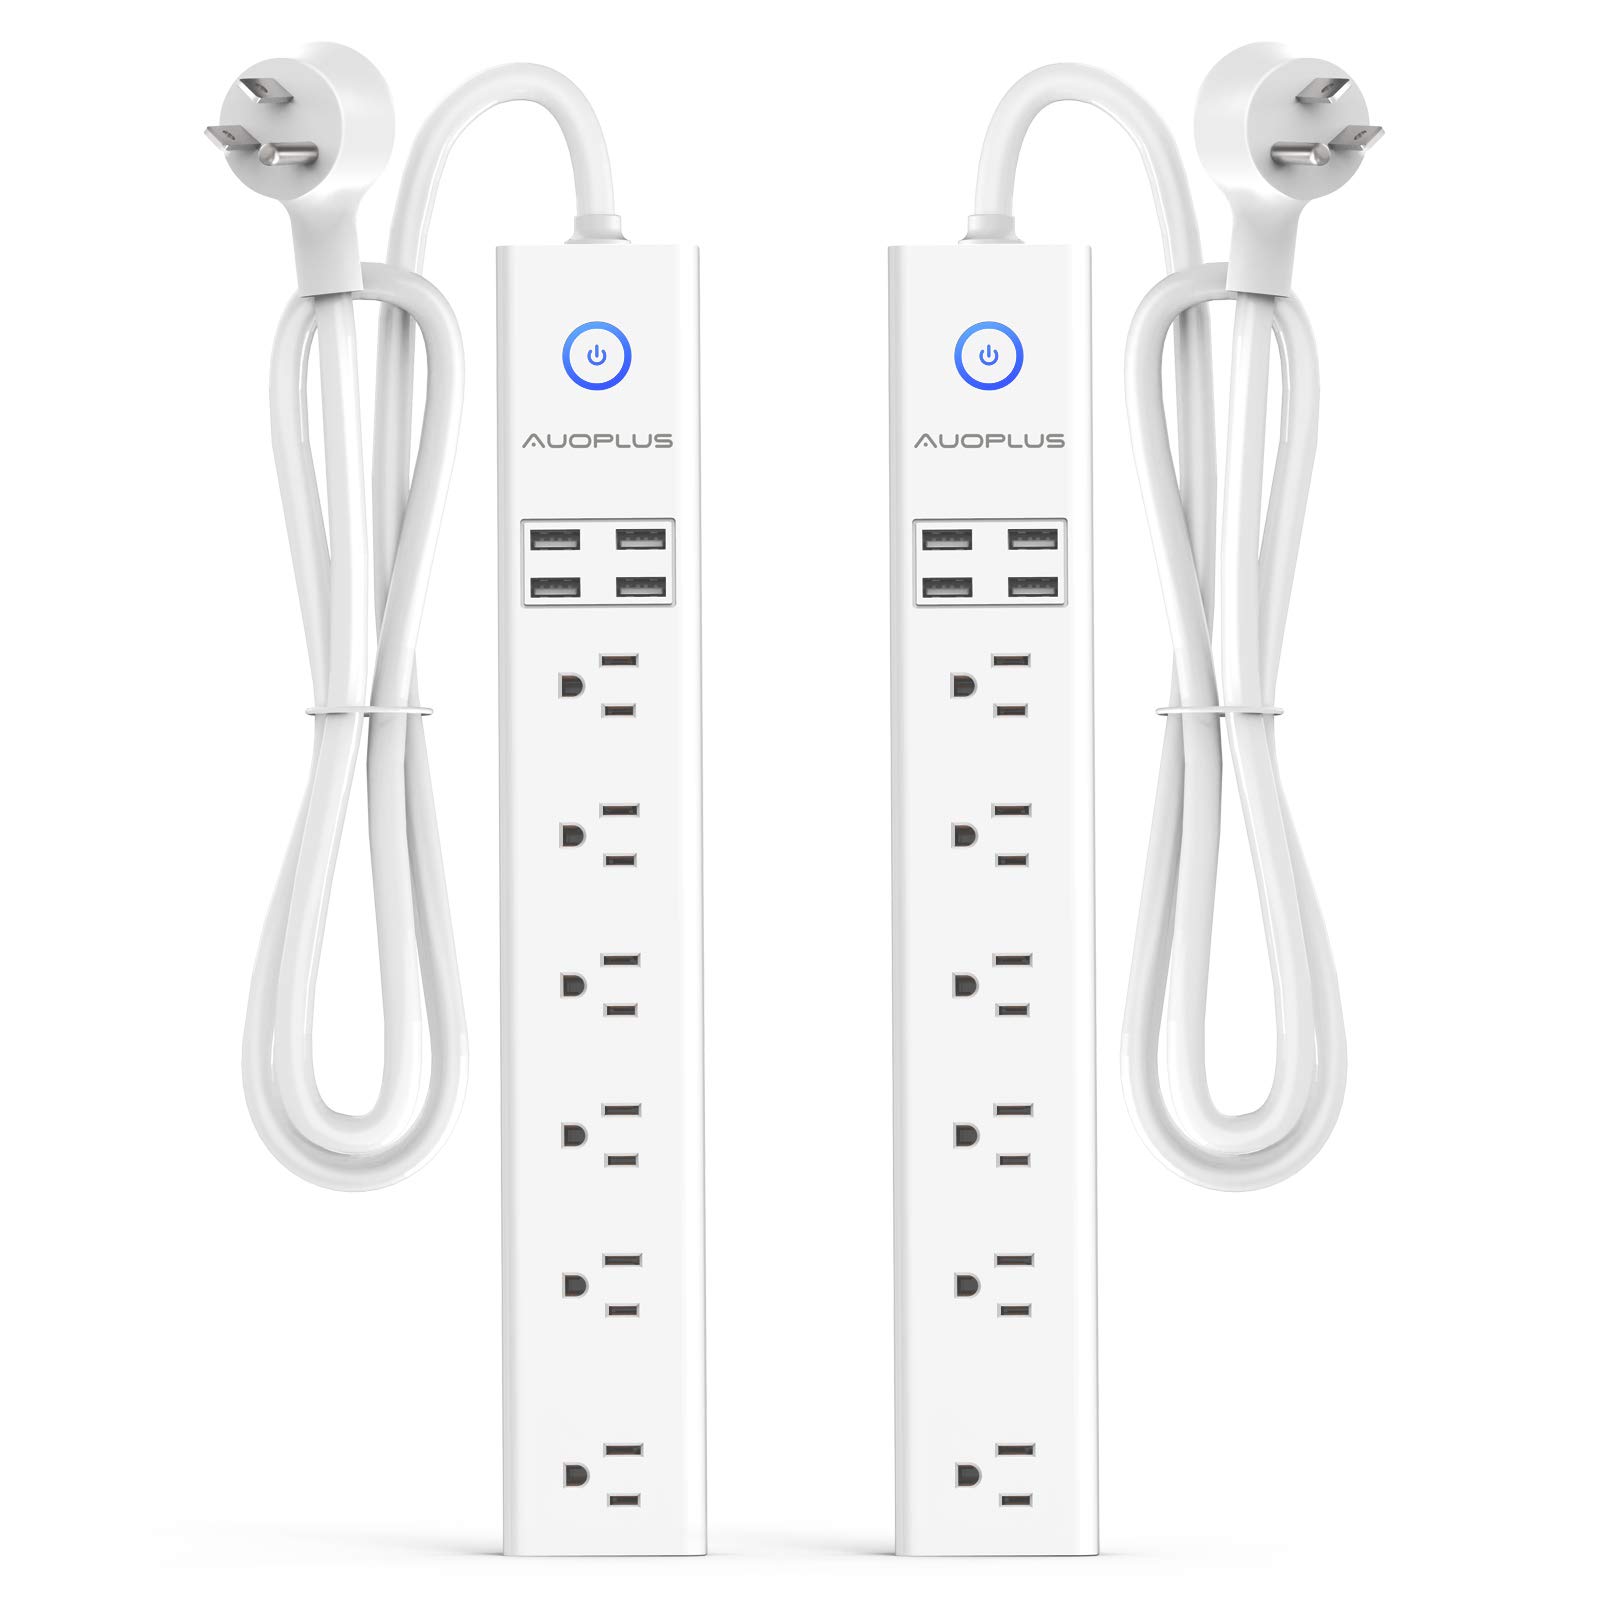 2 Pack Power Strip Surge Protector Flat Plug - 6 Widely Spaced Outlets 4 USB Charging Ports, 2100J/10A with 6Ft Long Extension Cord, Overload Surge Protection, Wall Mount for Home Office